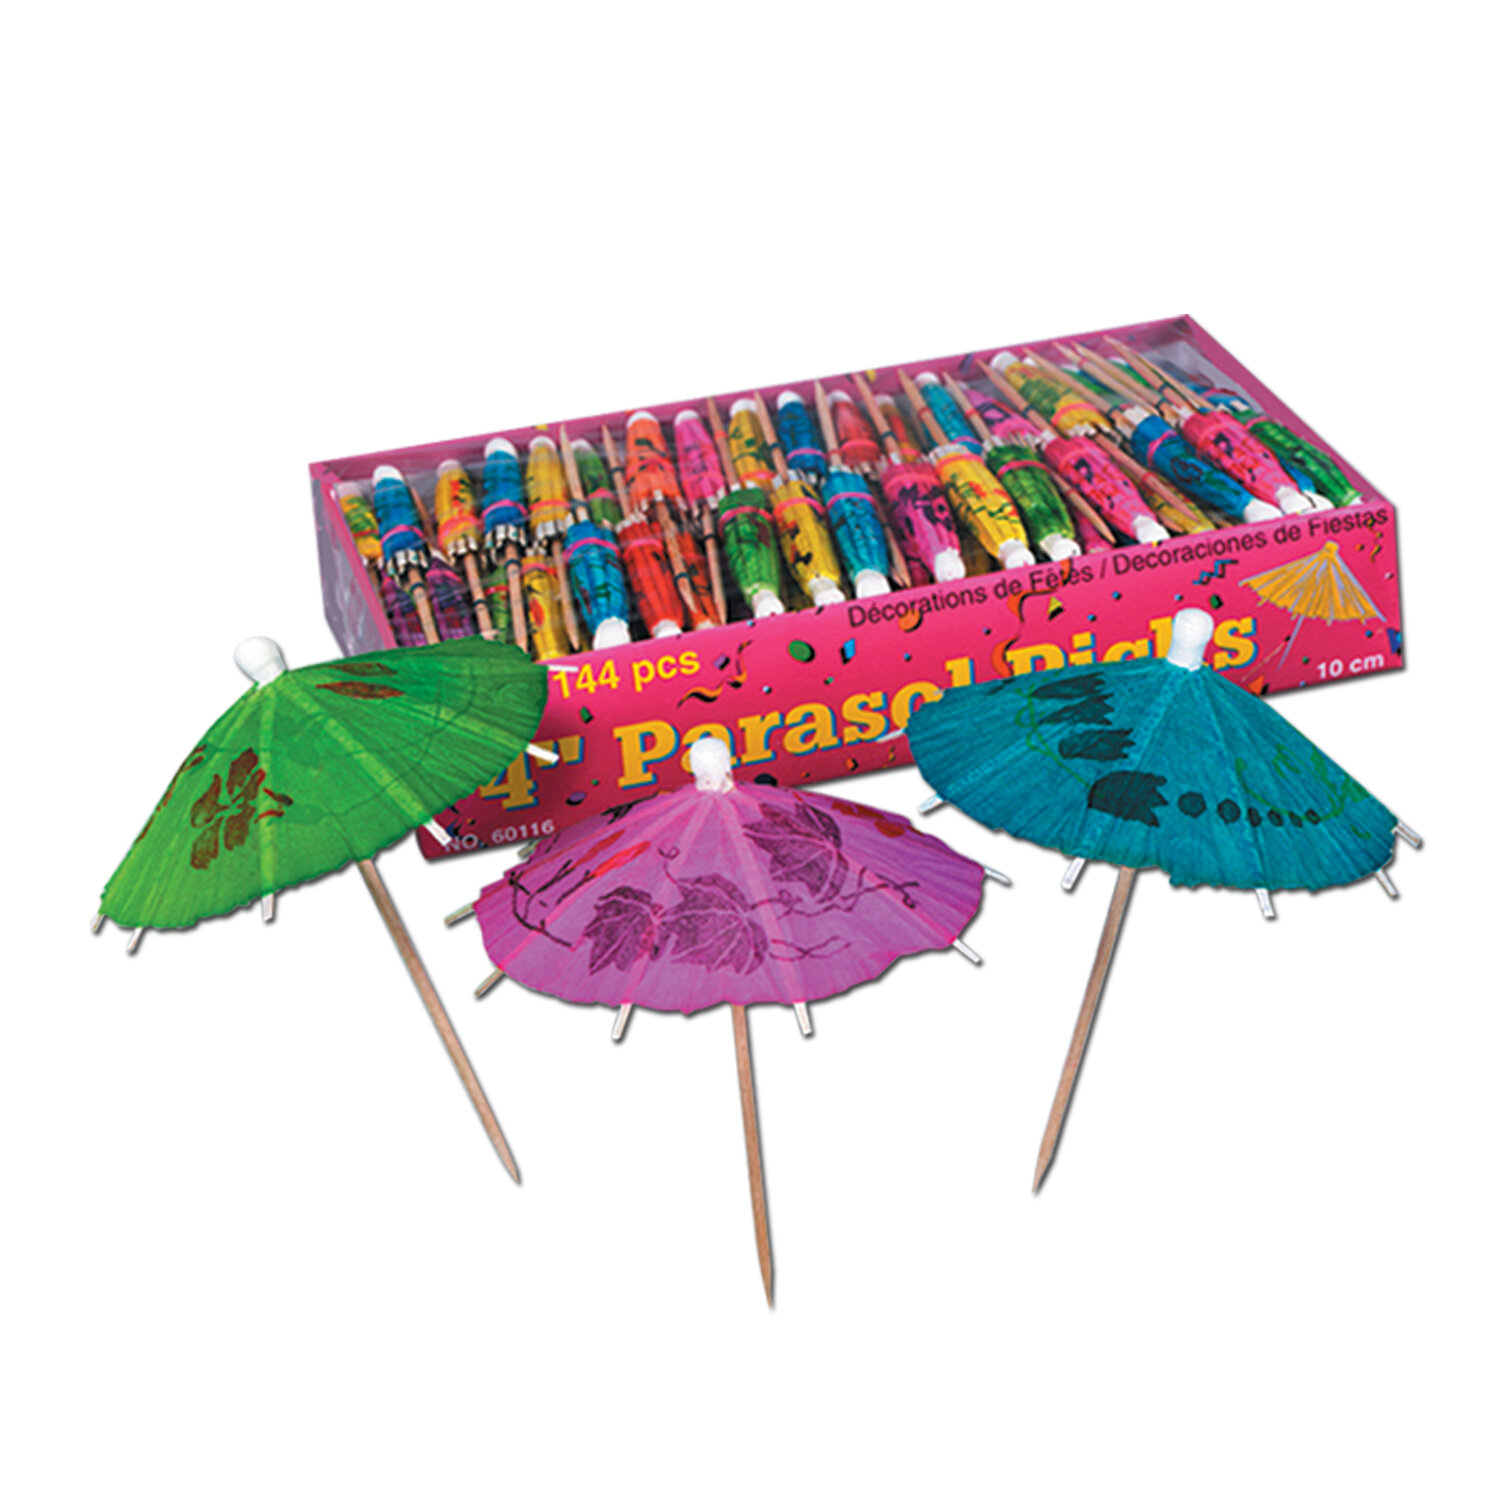 Beistle 60116 144-Pack Boxed Party Parasol Picks 4-Inch 